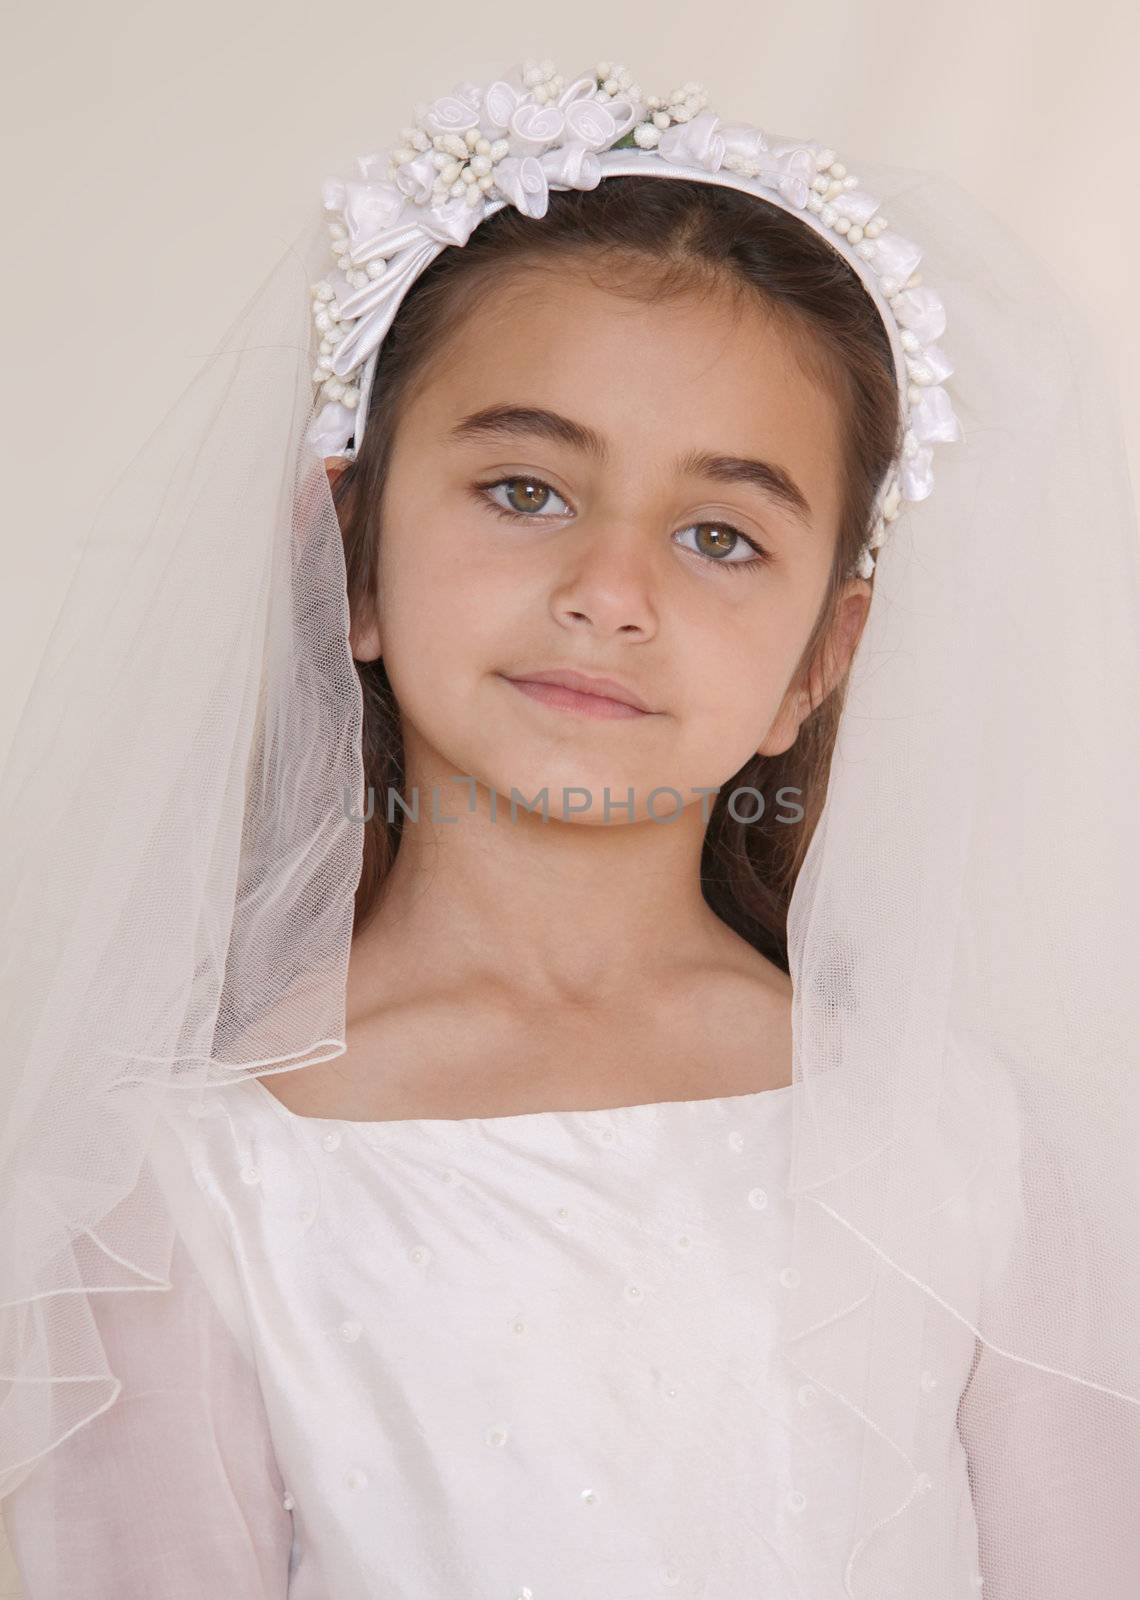 Portrait of a serious looking young girl who is celebrating her holy communion. The girl looks straight into the camera with big beautiful eyes.